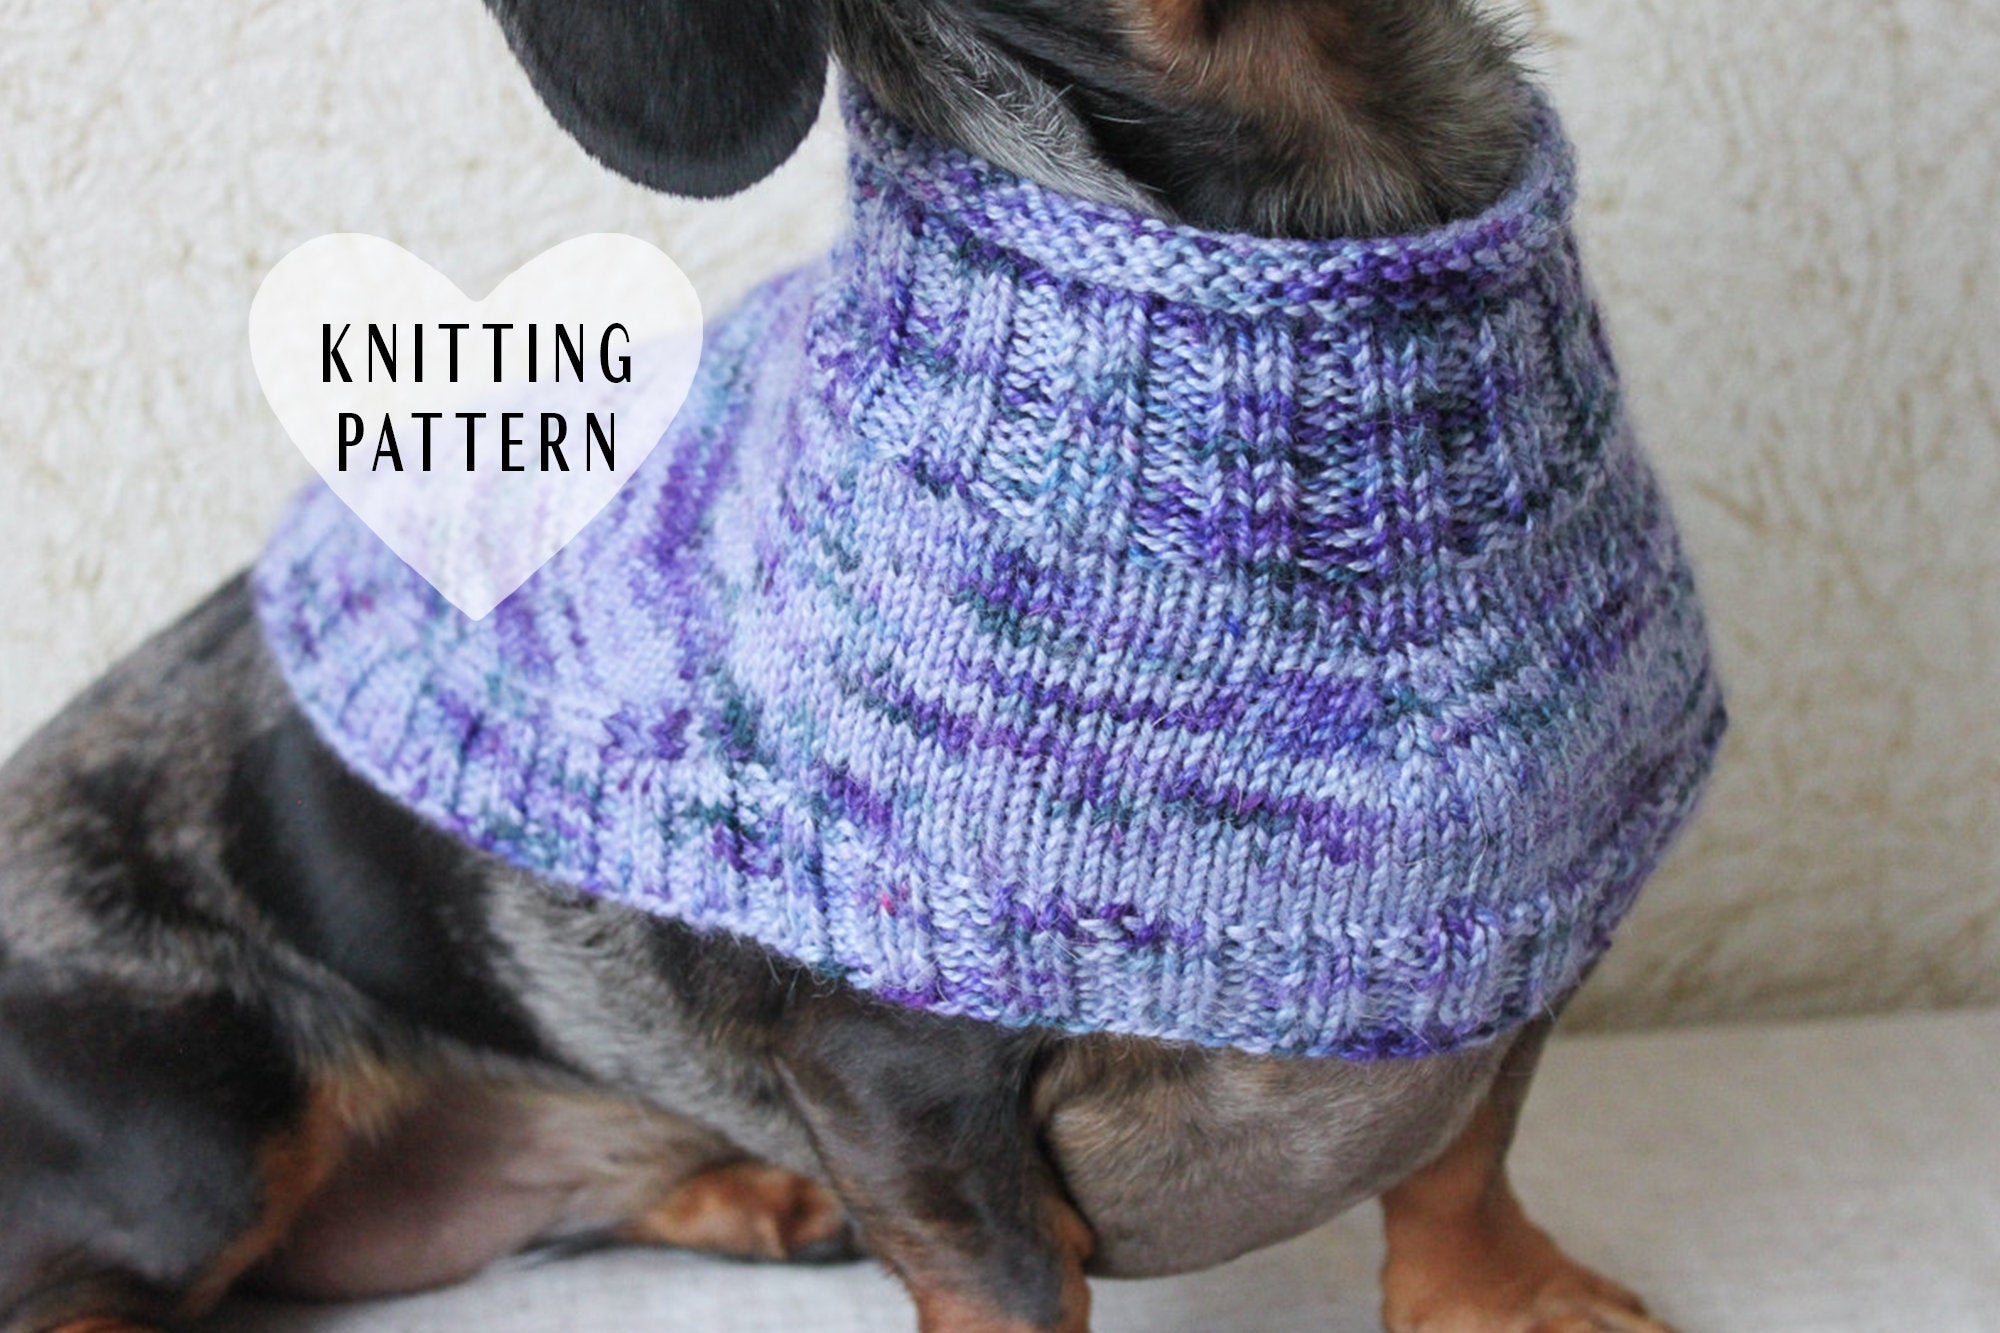 Dachshund Jumper Knitting Pattern Knitting Pattern Dachshund Capelet Dog Sweater Knitted Dog Cowl Miniature Dachshund Clothes Dog Clothes Doxie Capelet Pet Clothes